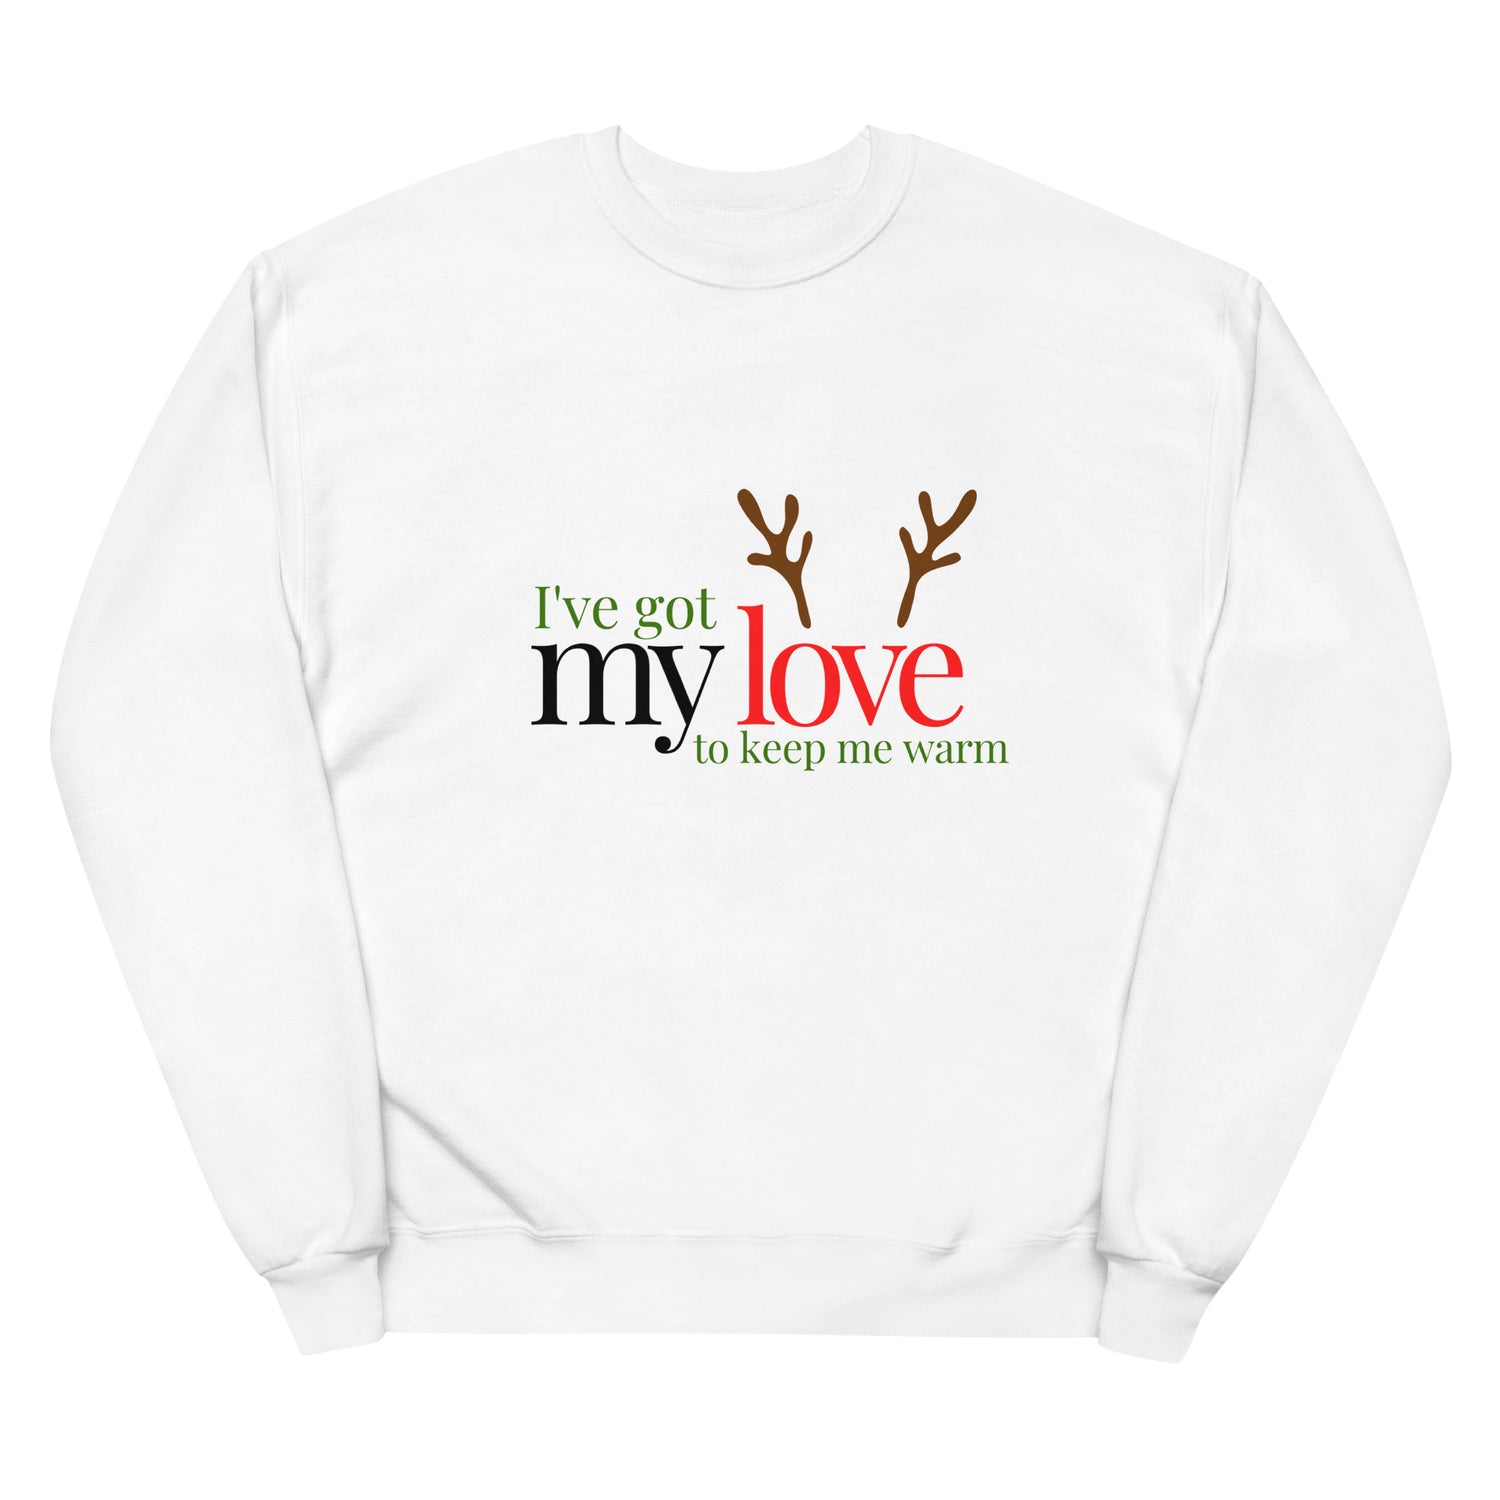 Christmas T-shirts and sweatshirts for couples, lovers and partners. Make a statement this holiday season alongside your favorite person! Stationery For Lovers limited edition matching Christmas themed t-shirts and sweatshirts!